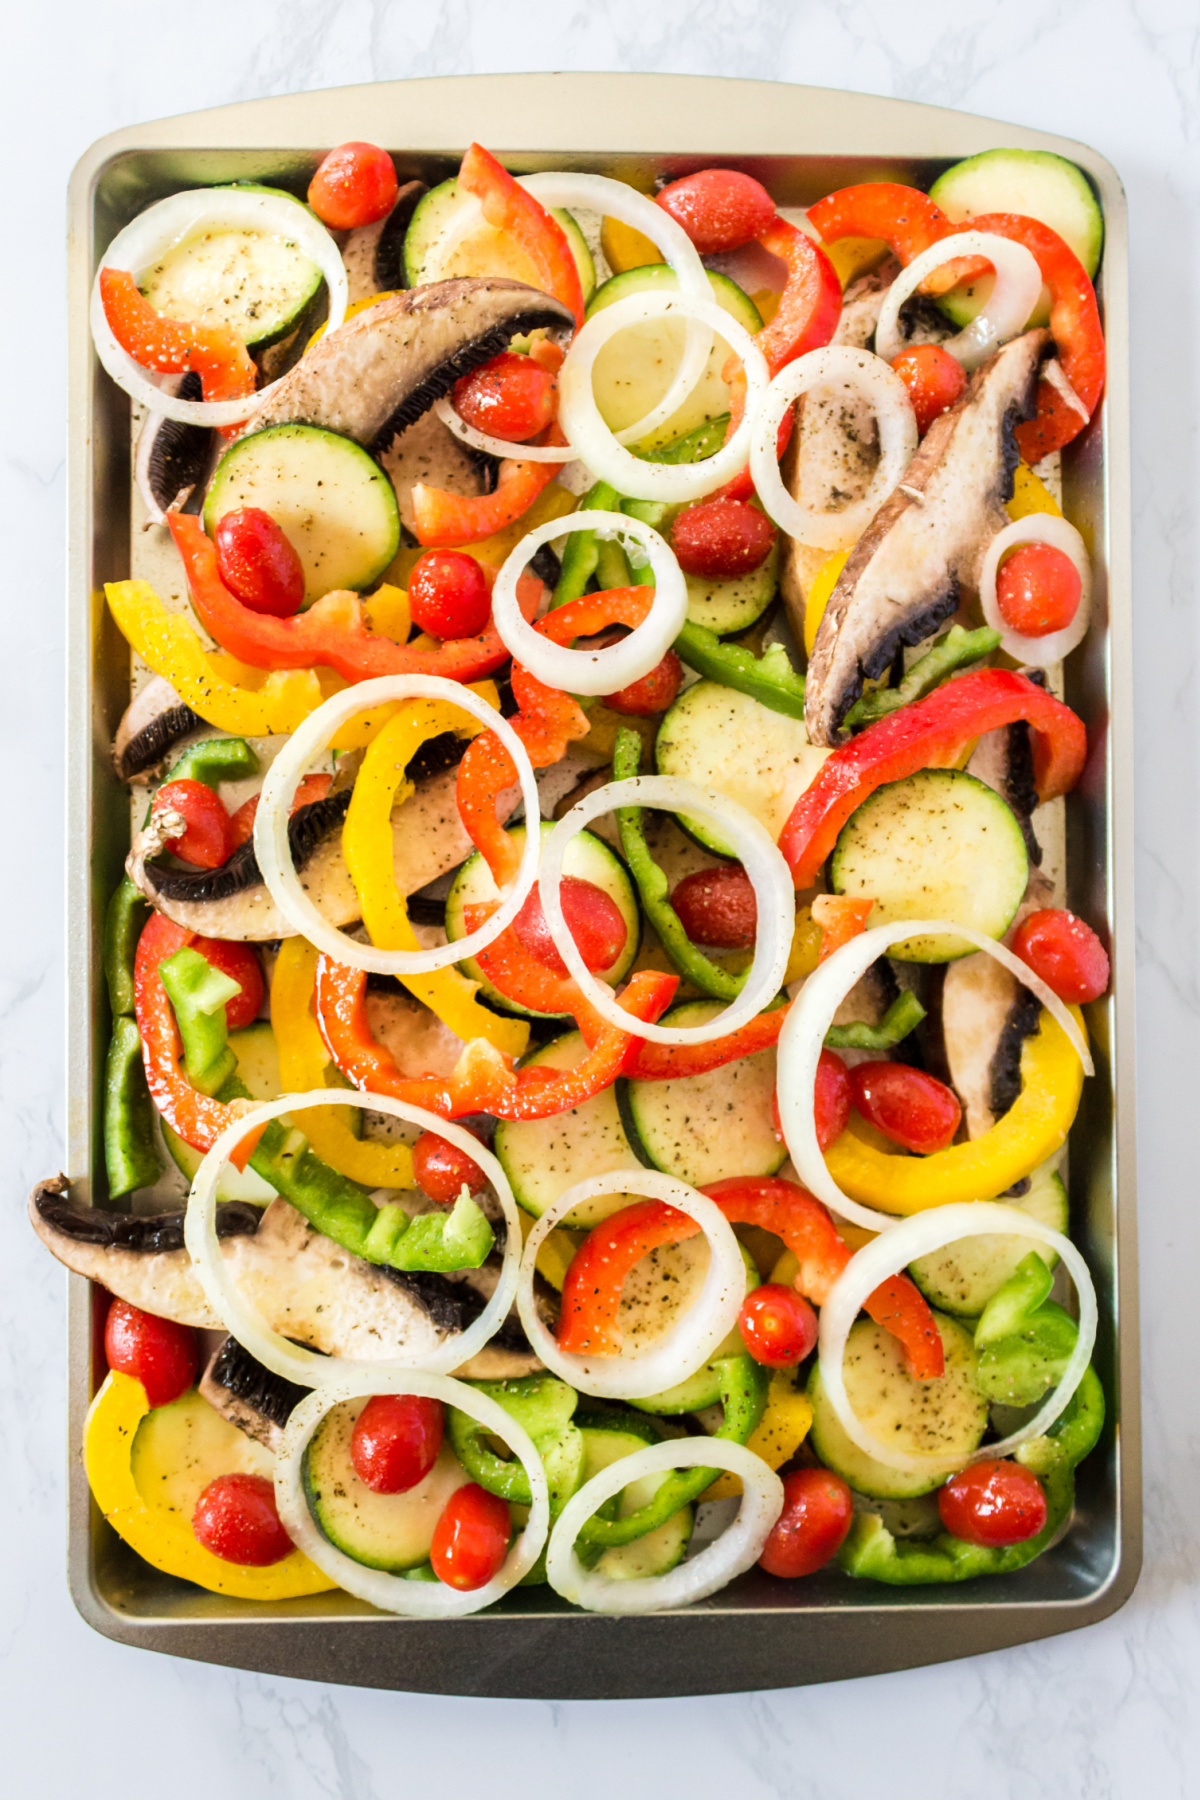 An assortment of raw, sliced vegetables seasoned with pepper on a baking sheet, ready to be roasted.